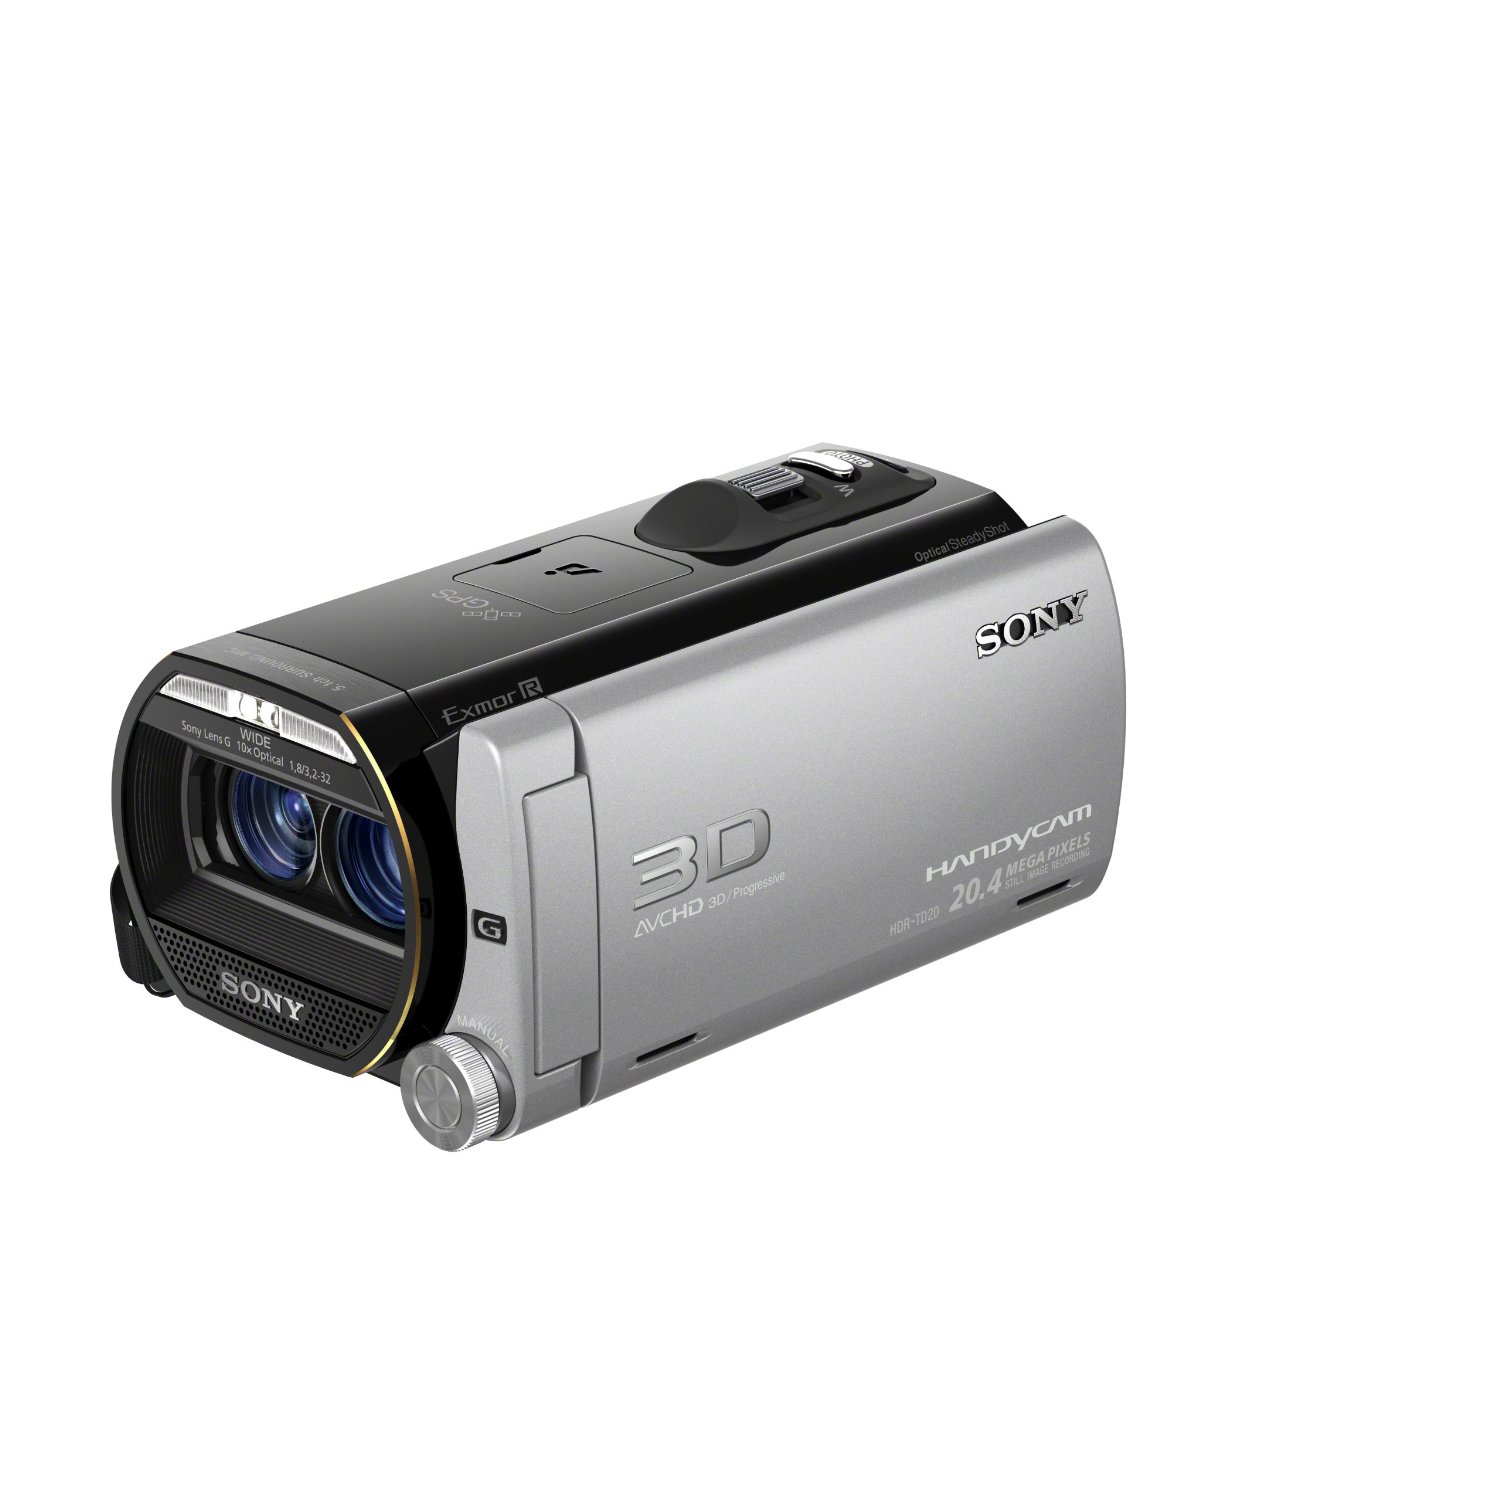 http://thetechjournal.com/wp-content/uploads/images/1203/1333213211-sony-hdrtd20v-hd-handycam-204-mp-3d-camcorder-6.jpg